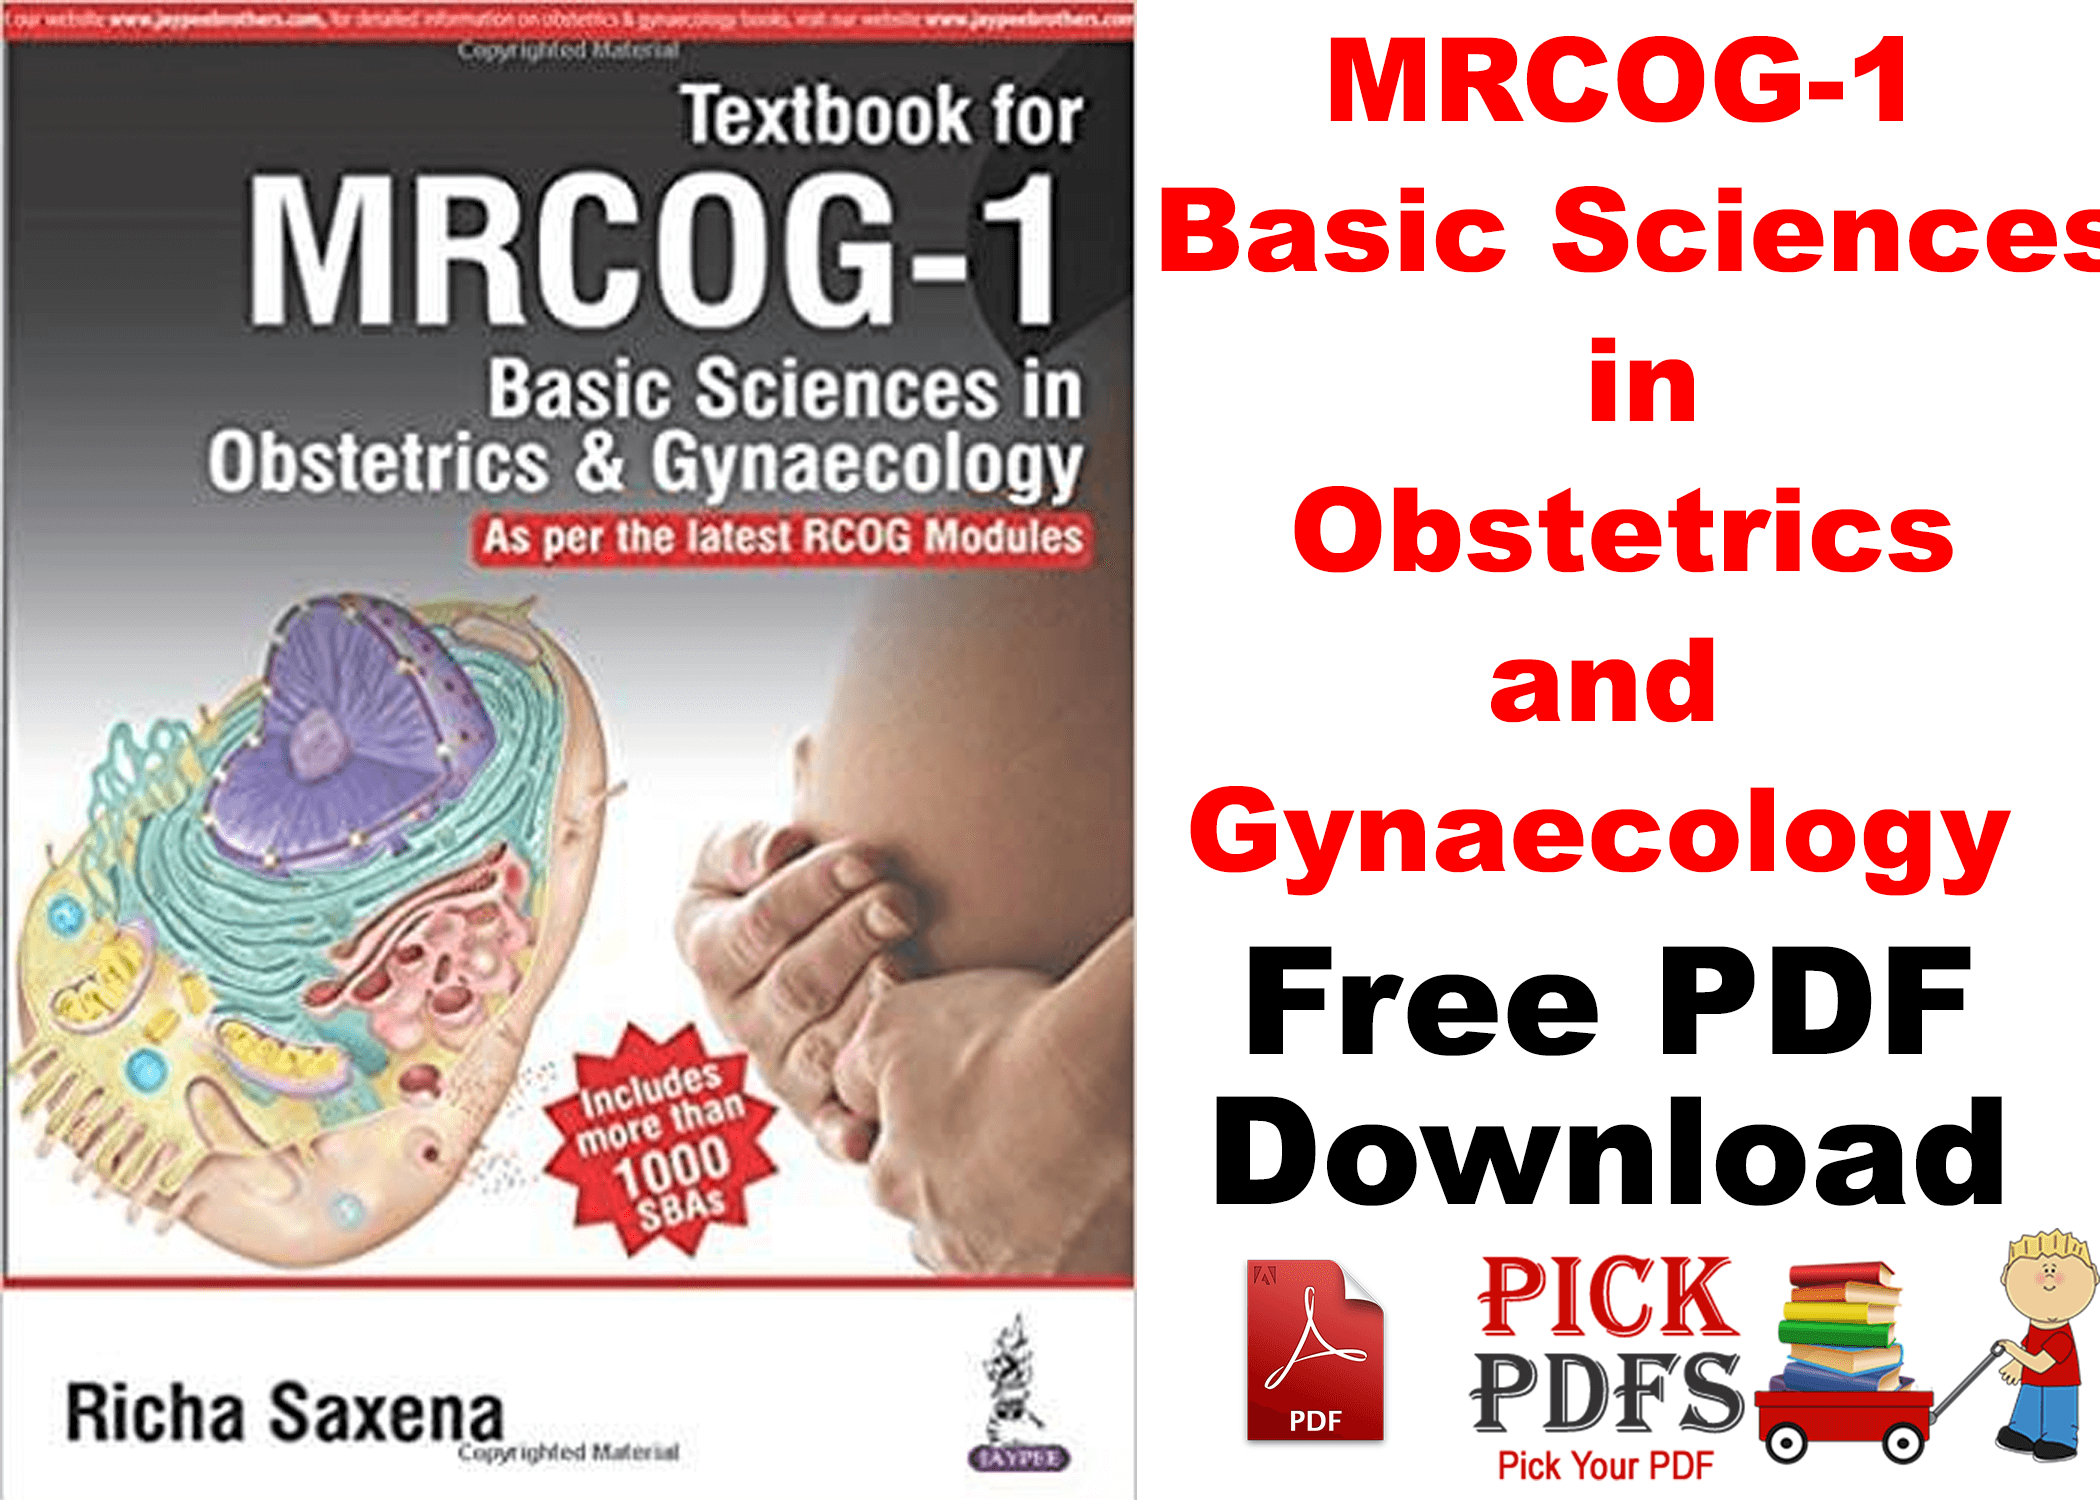 https://pickpdfs.com/download-obstetrics-and-gynecology-pretest-self-assessment-and-review-pdf-14th-edition-free/